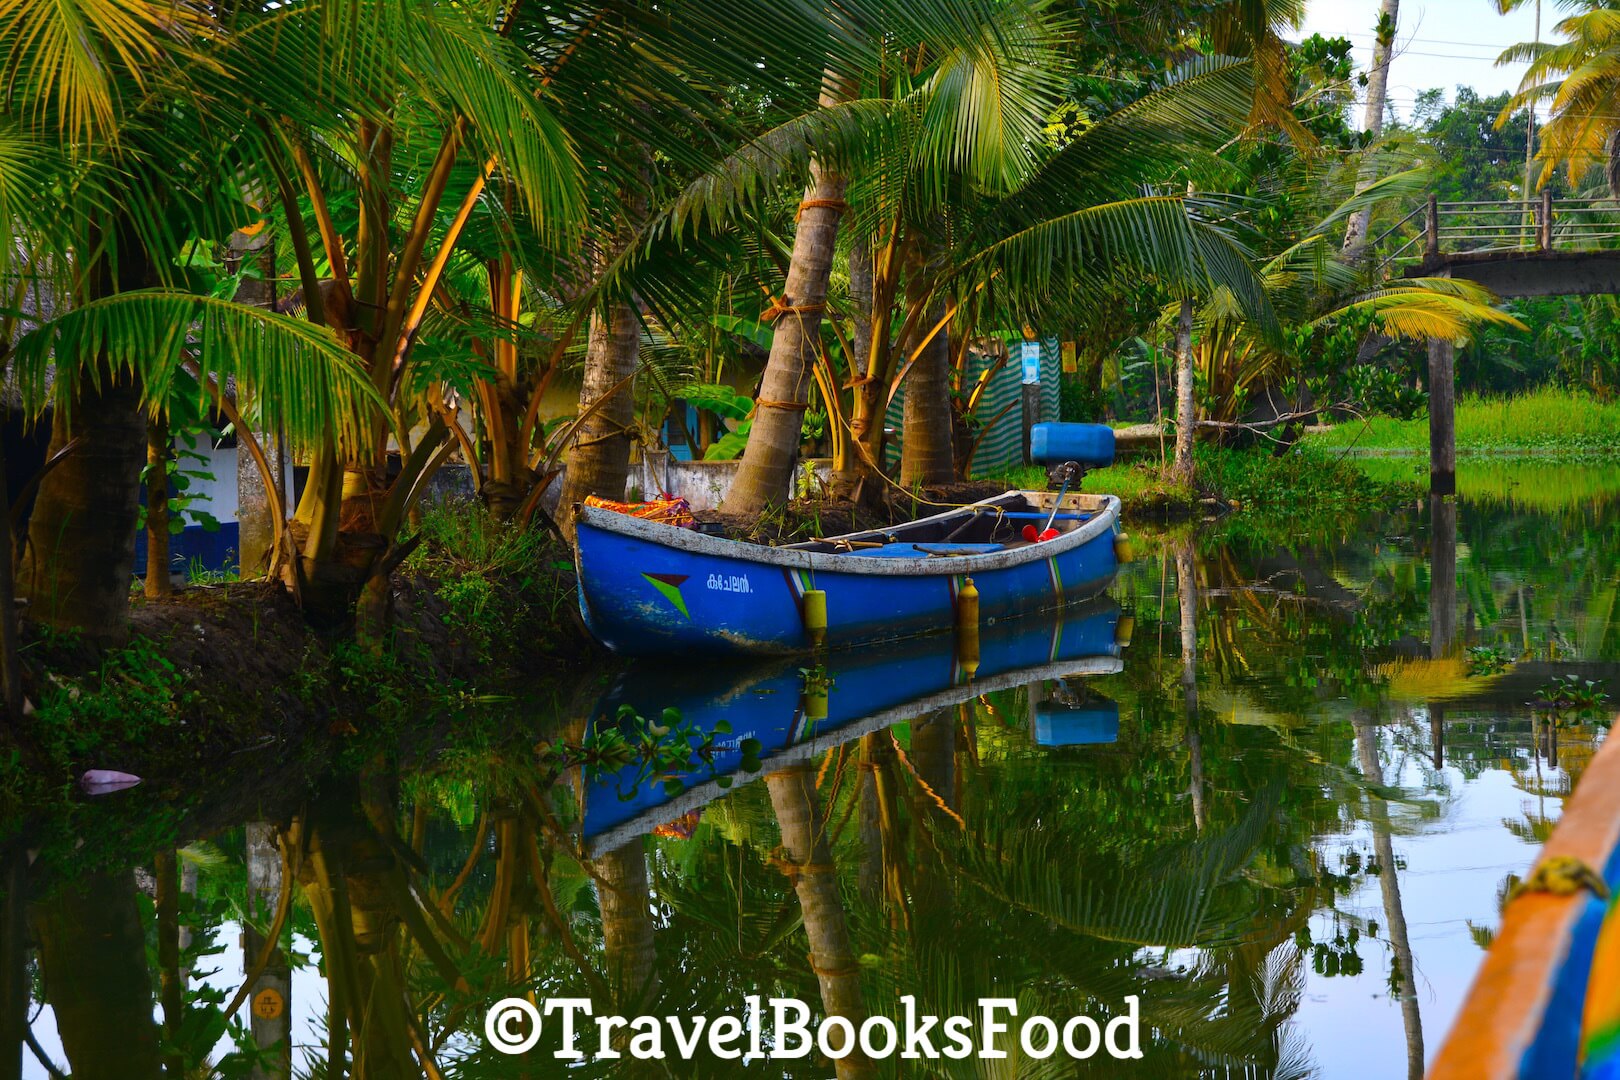 Photo of a blue fishing boat surrounded by coconut trees in Kerala, India